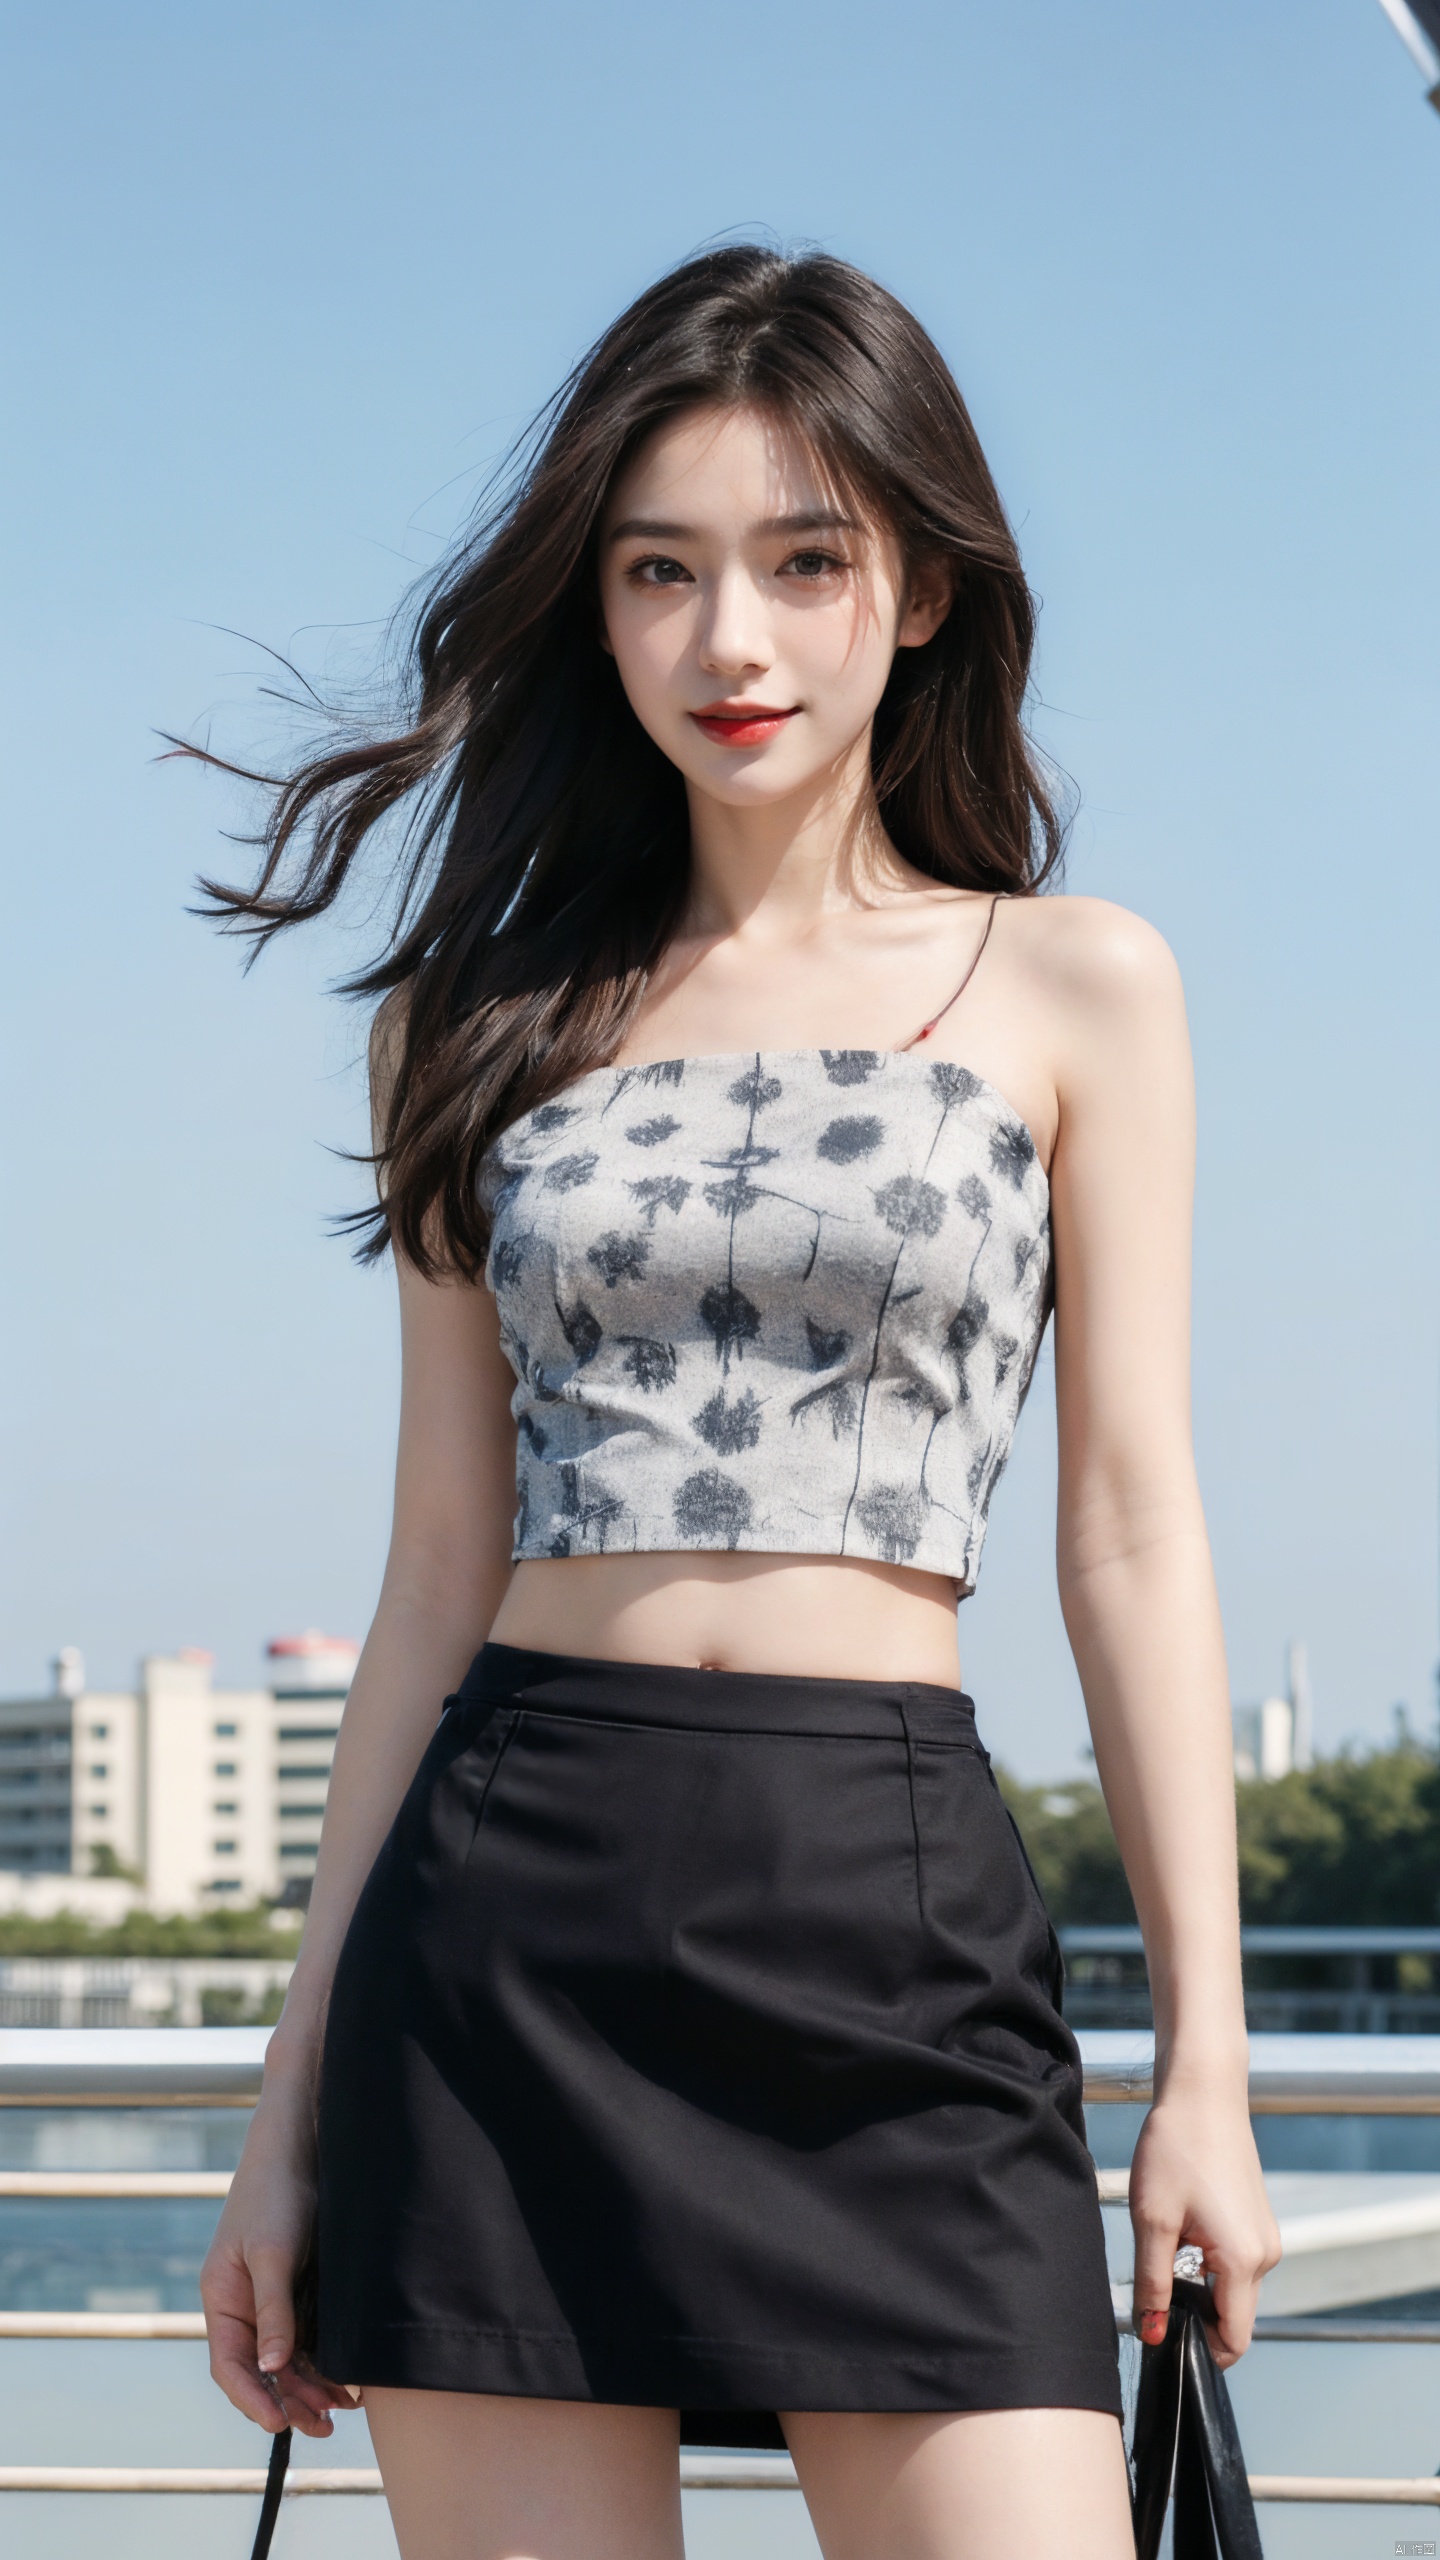  masterpiece,8K,best quality,1girl,smile,navel,long hair,breasts,solo,looking at viewer,midriff,realistic,blurry background,blurry,medium breasts,**** top,pencil_skirt,teeth,crop top,brown eyes,red lips,black hair,long hair,massive hair,light behind hair,hair in front,her hair rested on her shoulders,sun behind,slim hip,float hair,floating hair,flying hair,hair blown by the wind,white clouds behind,the broken hair in the front,messy shaggy hair,dust blown by the wind,mist in front,best quality,ultra high res,ice magic,light particles,sparkle,backlighting,loli,little girl,(child:0.5),13yo,rubber mesh clothes,(black and vibrant ruby red color),art by agnes cecile and agostino arrivabene and alberto dros,drawing,freeform,swirling patterns,doodle art style,little girl,black miniskirt,Leather clothes,Strapless, chineseclothes, blue shirt